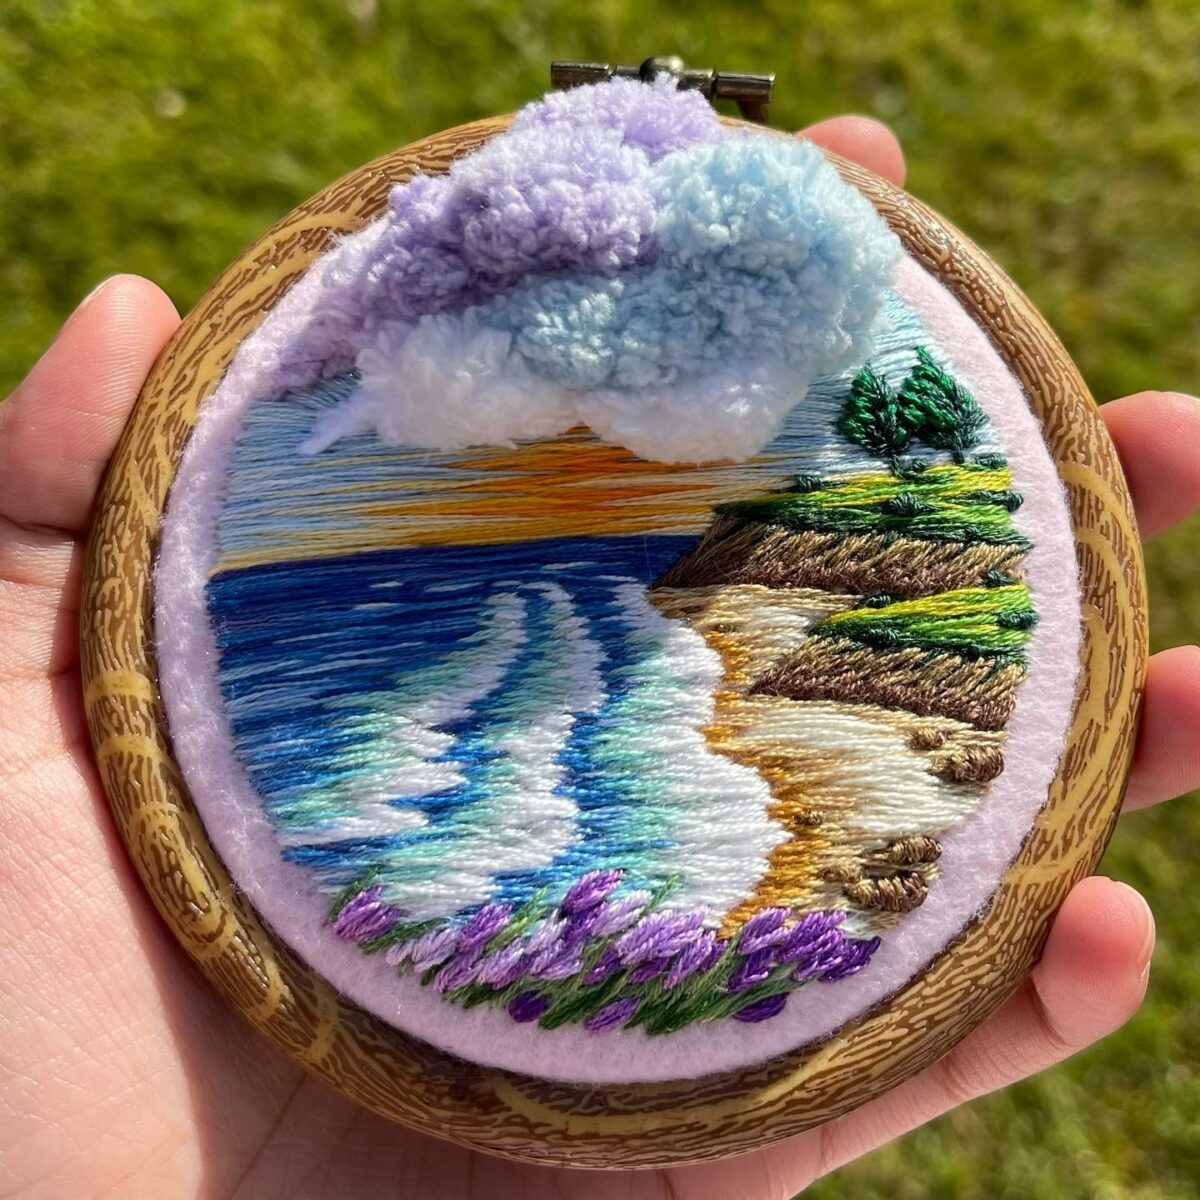 Stunning Embroidery Hoop Arts By Sew Beautiful